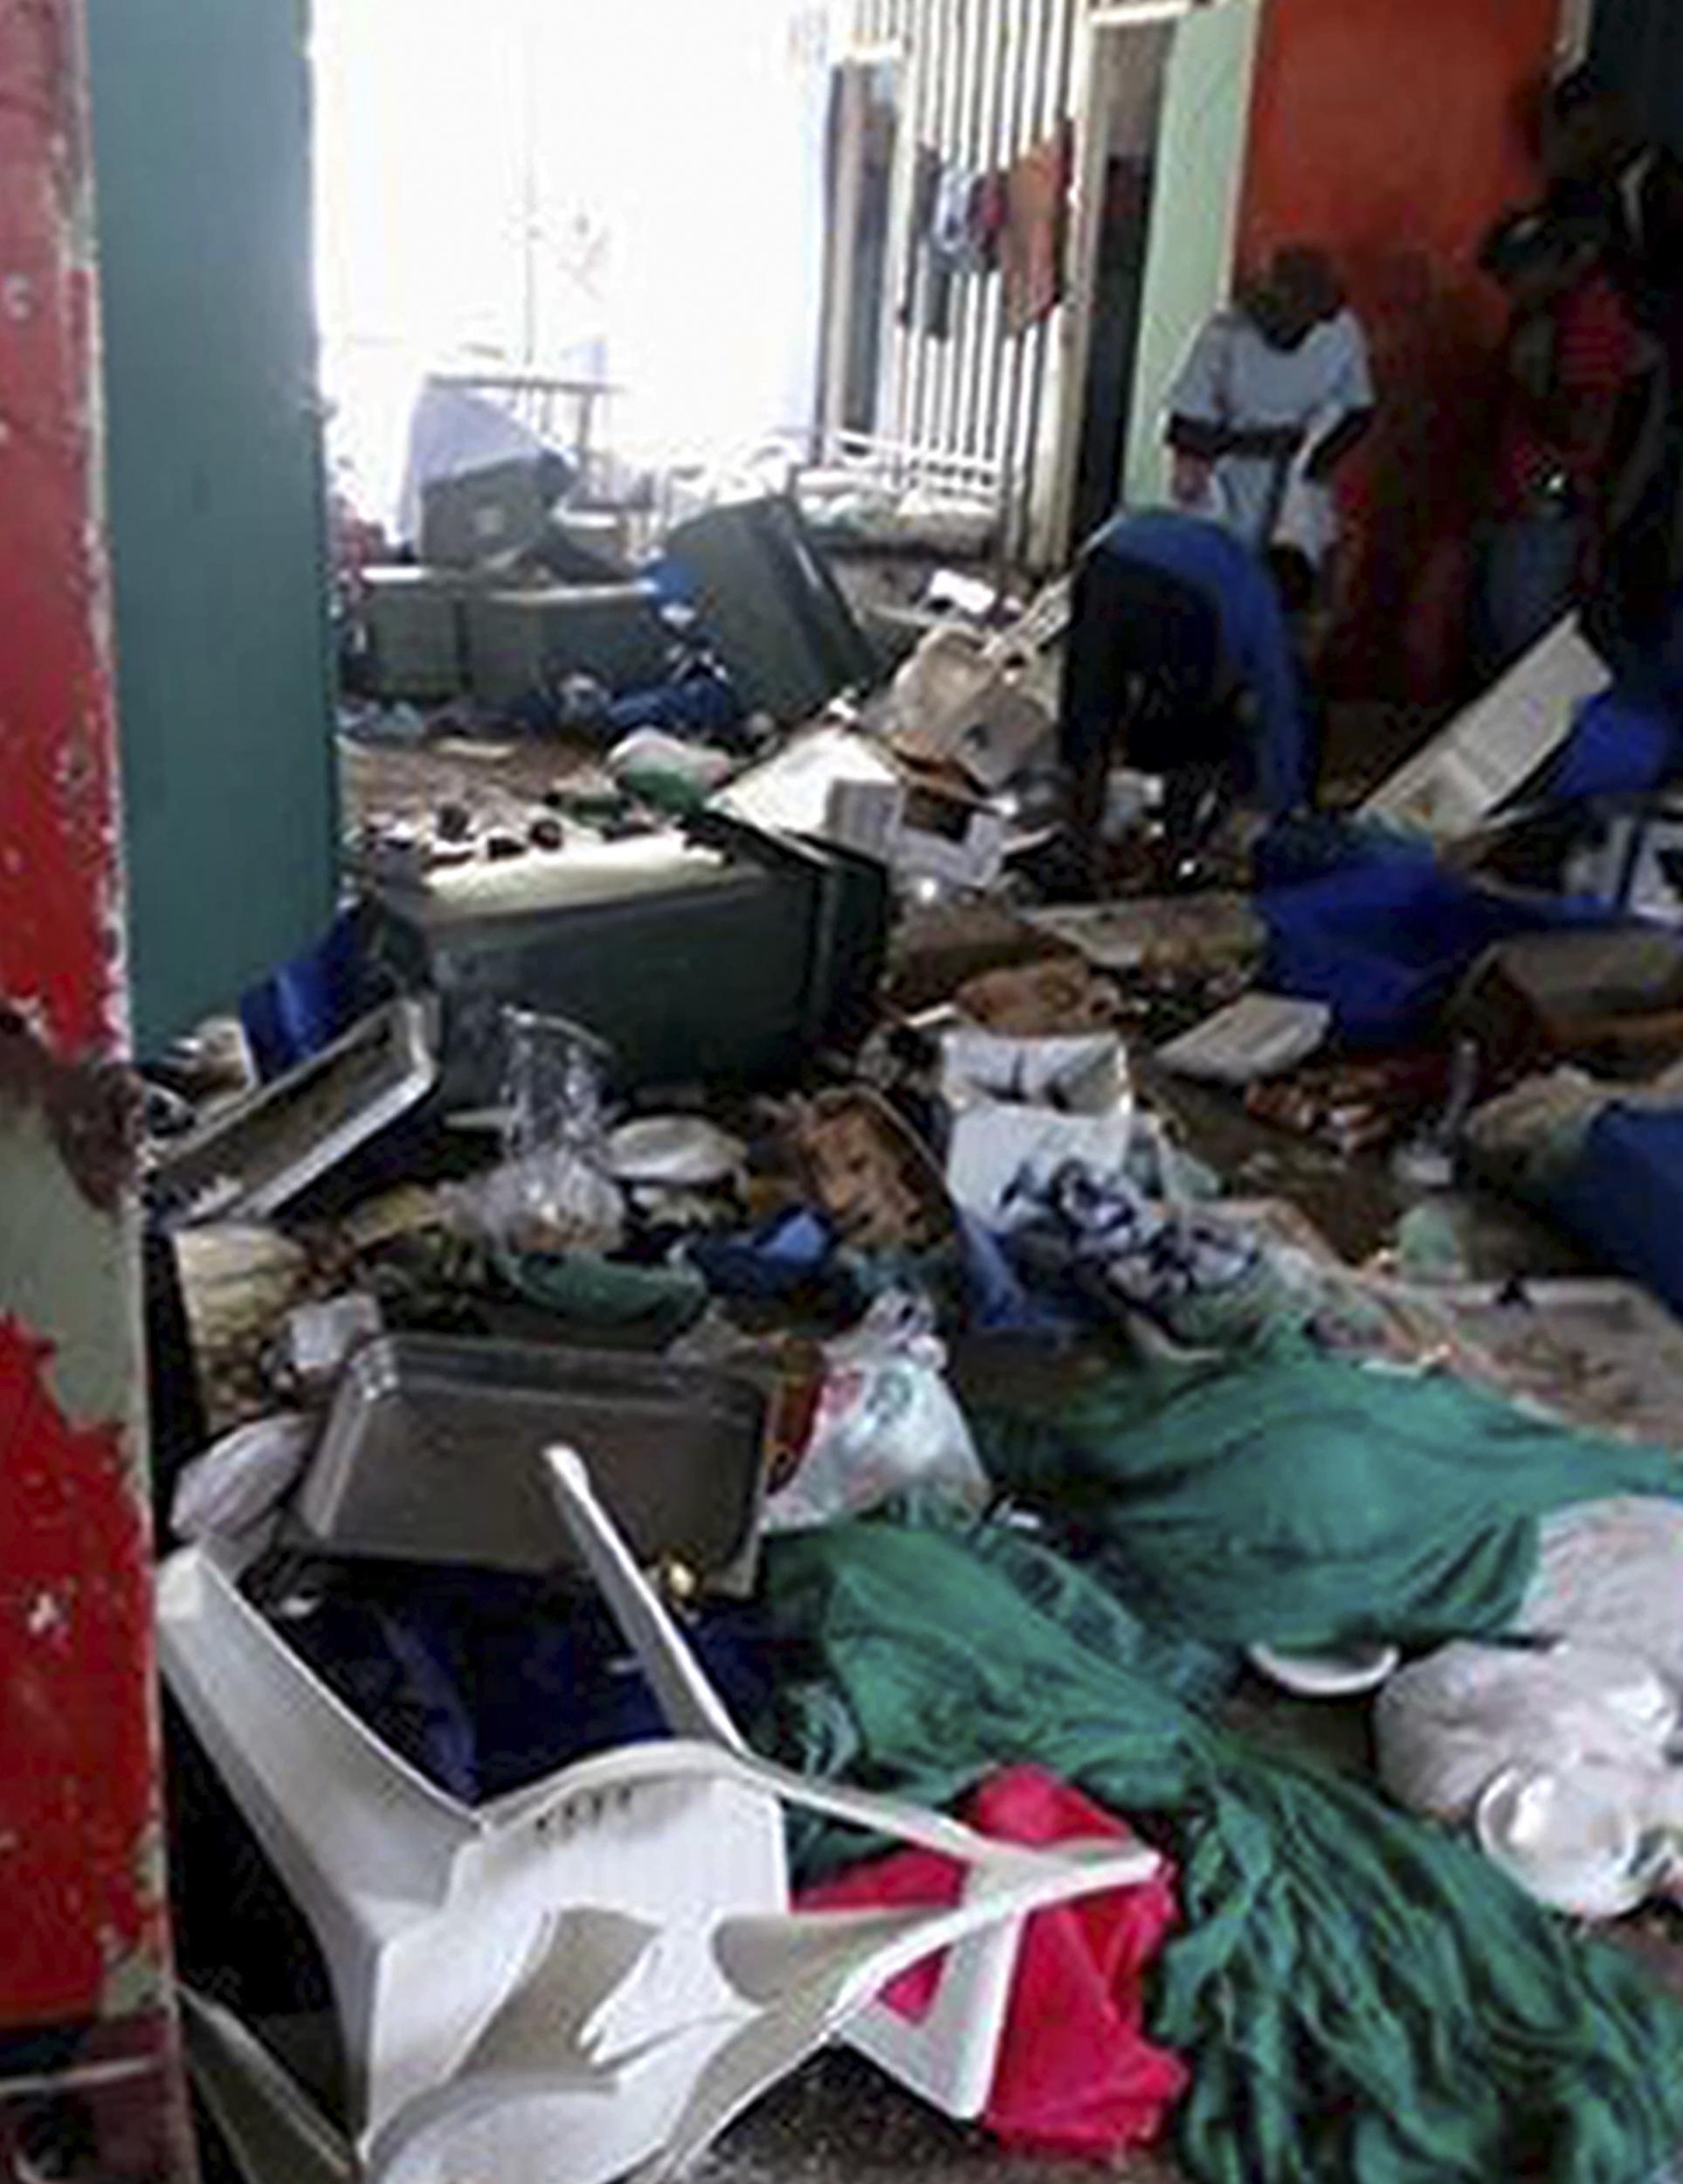 Image purportedly shows the ransacked immigration camp on Manus Island, Papua New Guinea, on Thursday